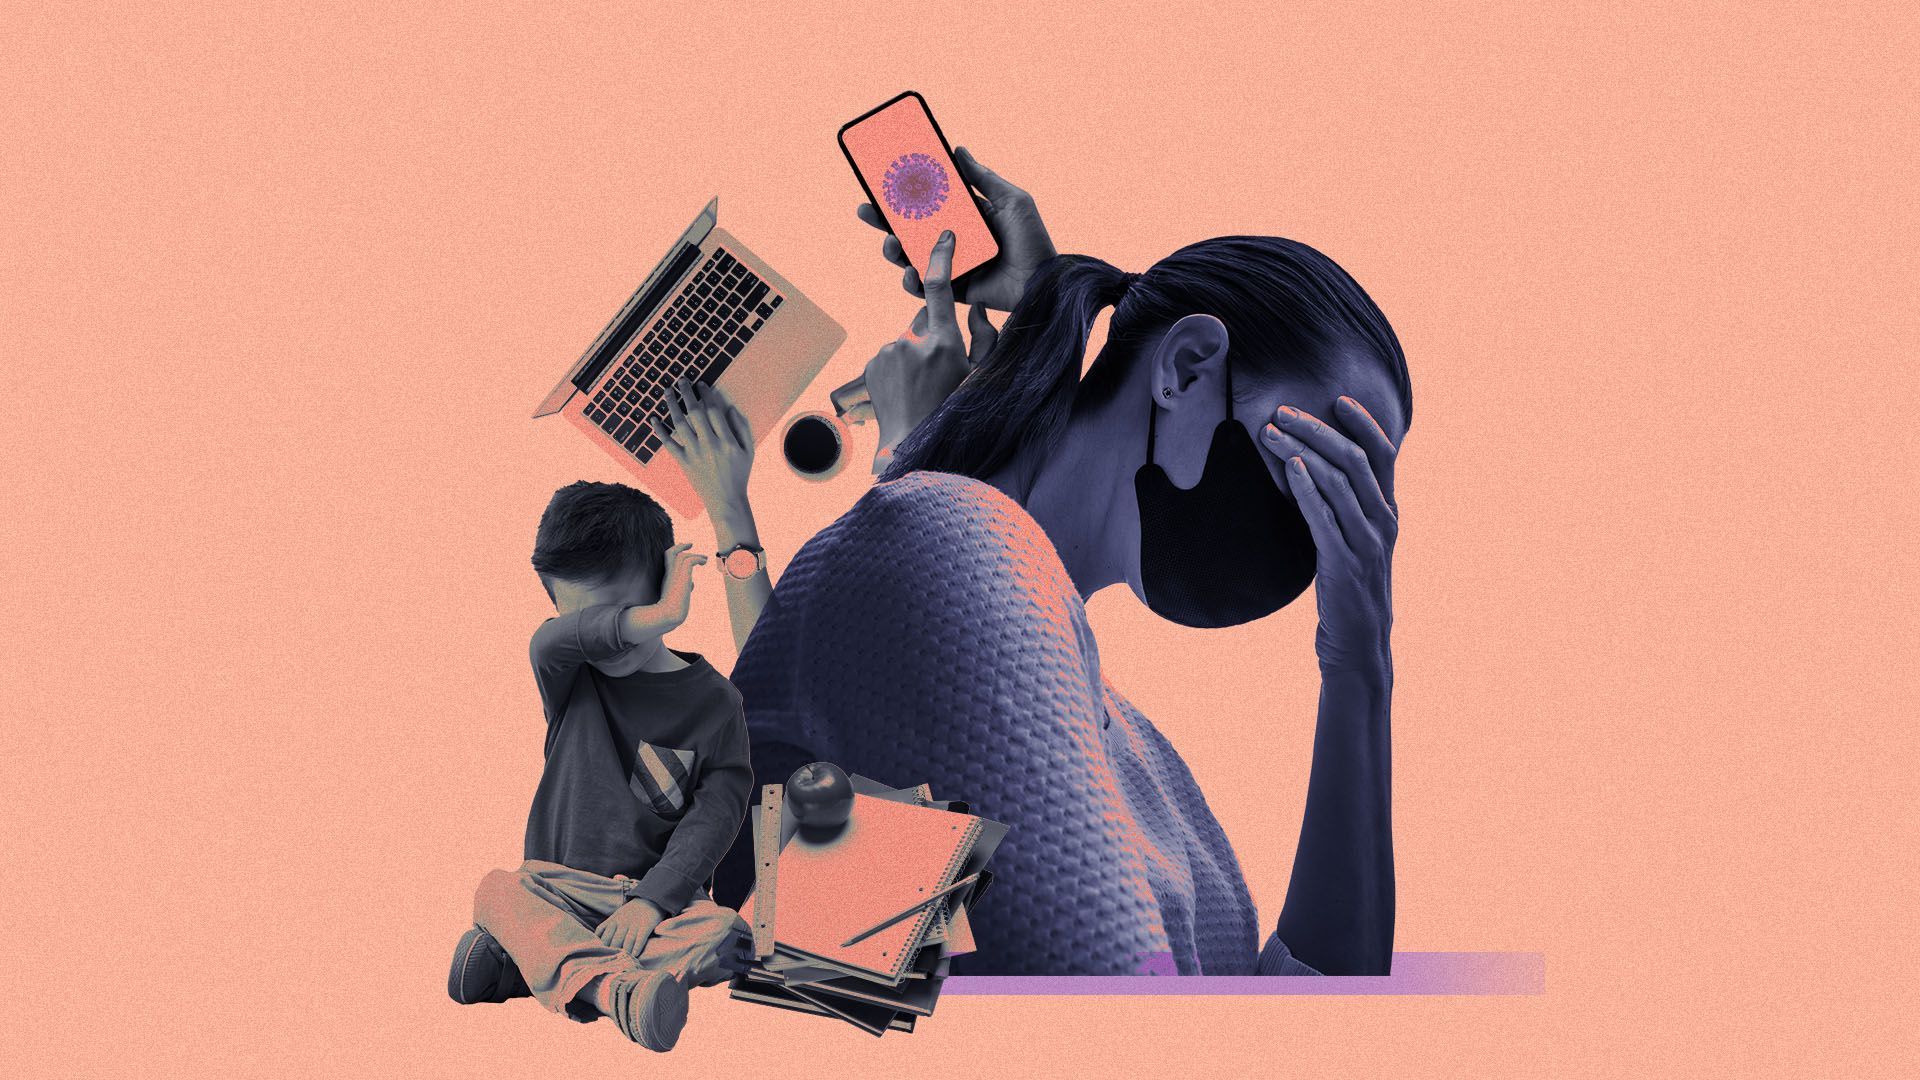 Illustrated collage of a stressed woman with mask on surrounded by school books, a crying child, a laptop, and a cell phone with a virus image on the screen.